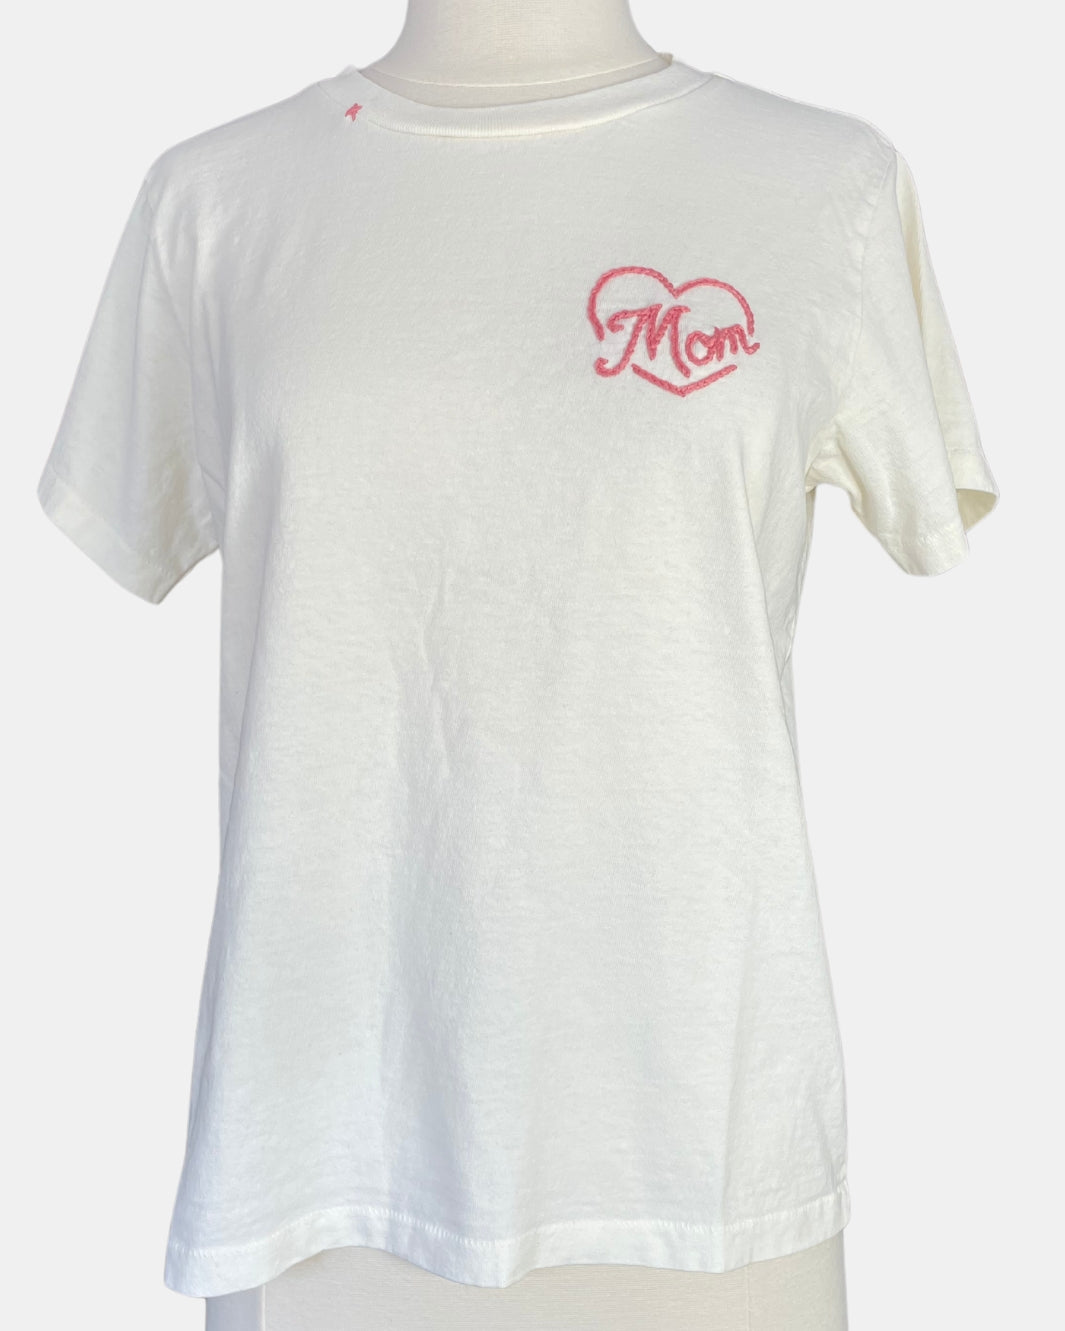 MOM TEE IN OFF WHITE - Romi Boutique